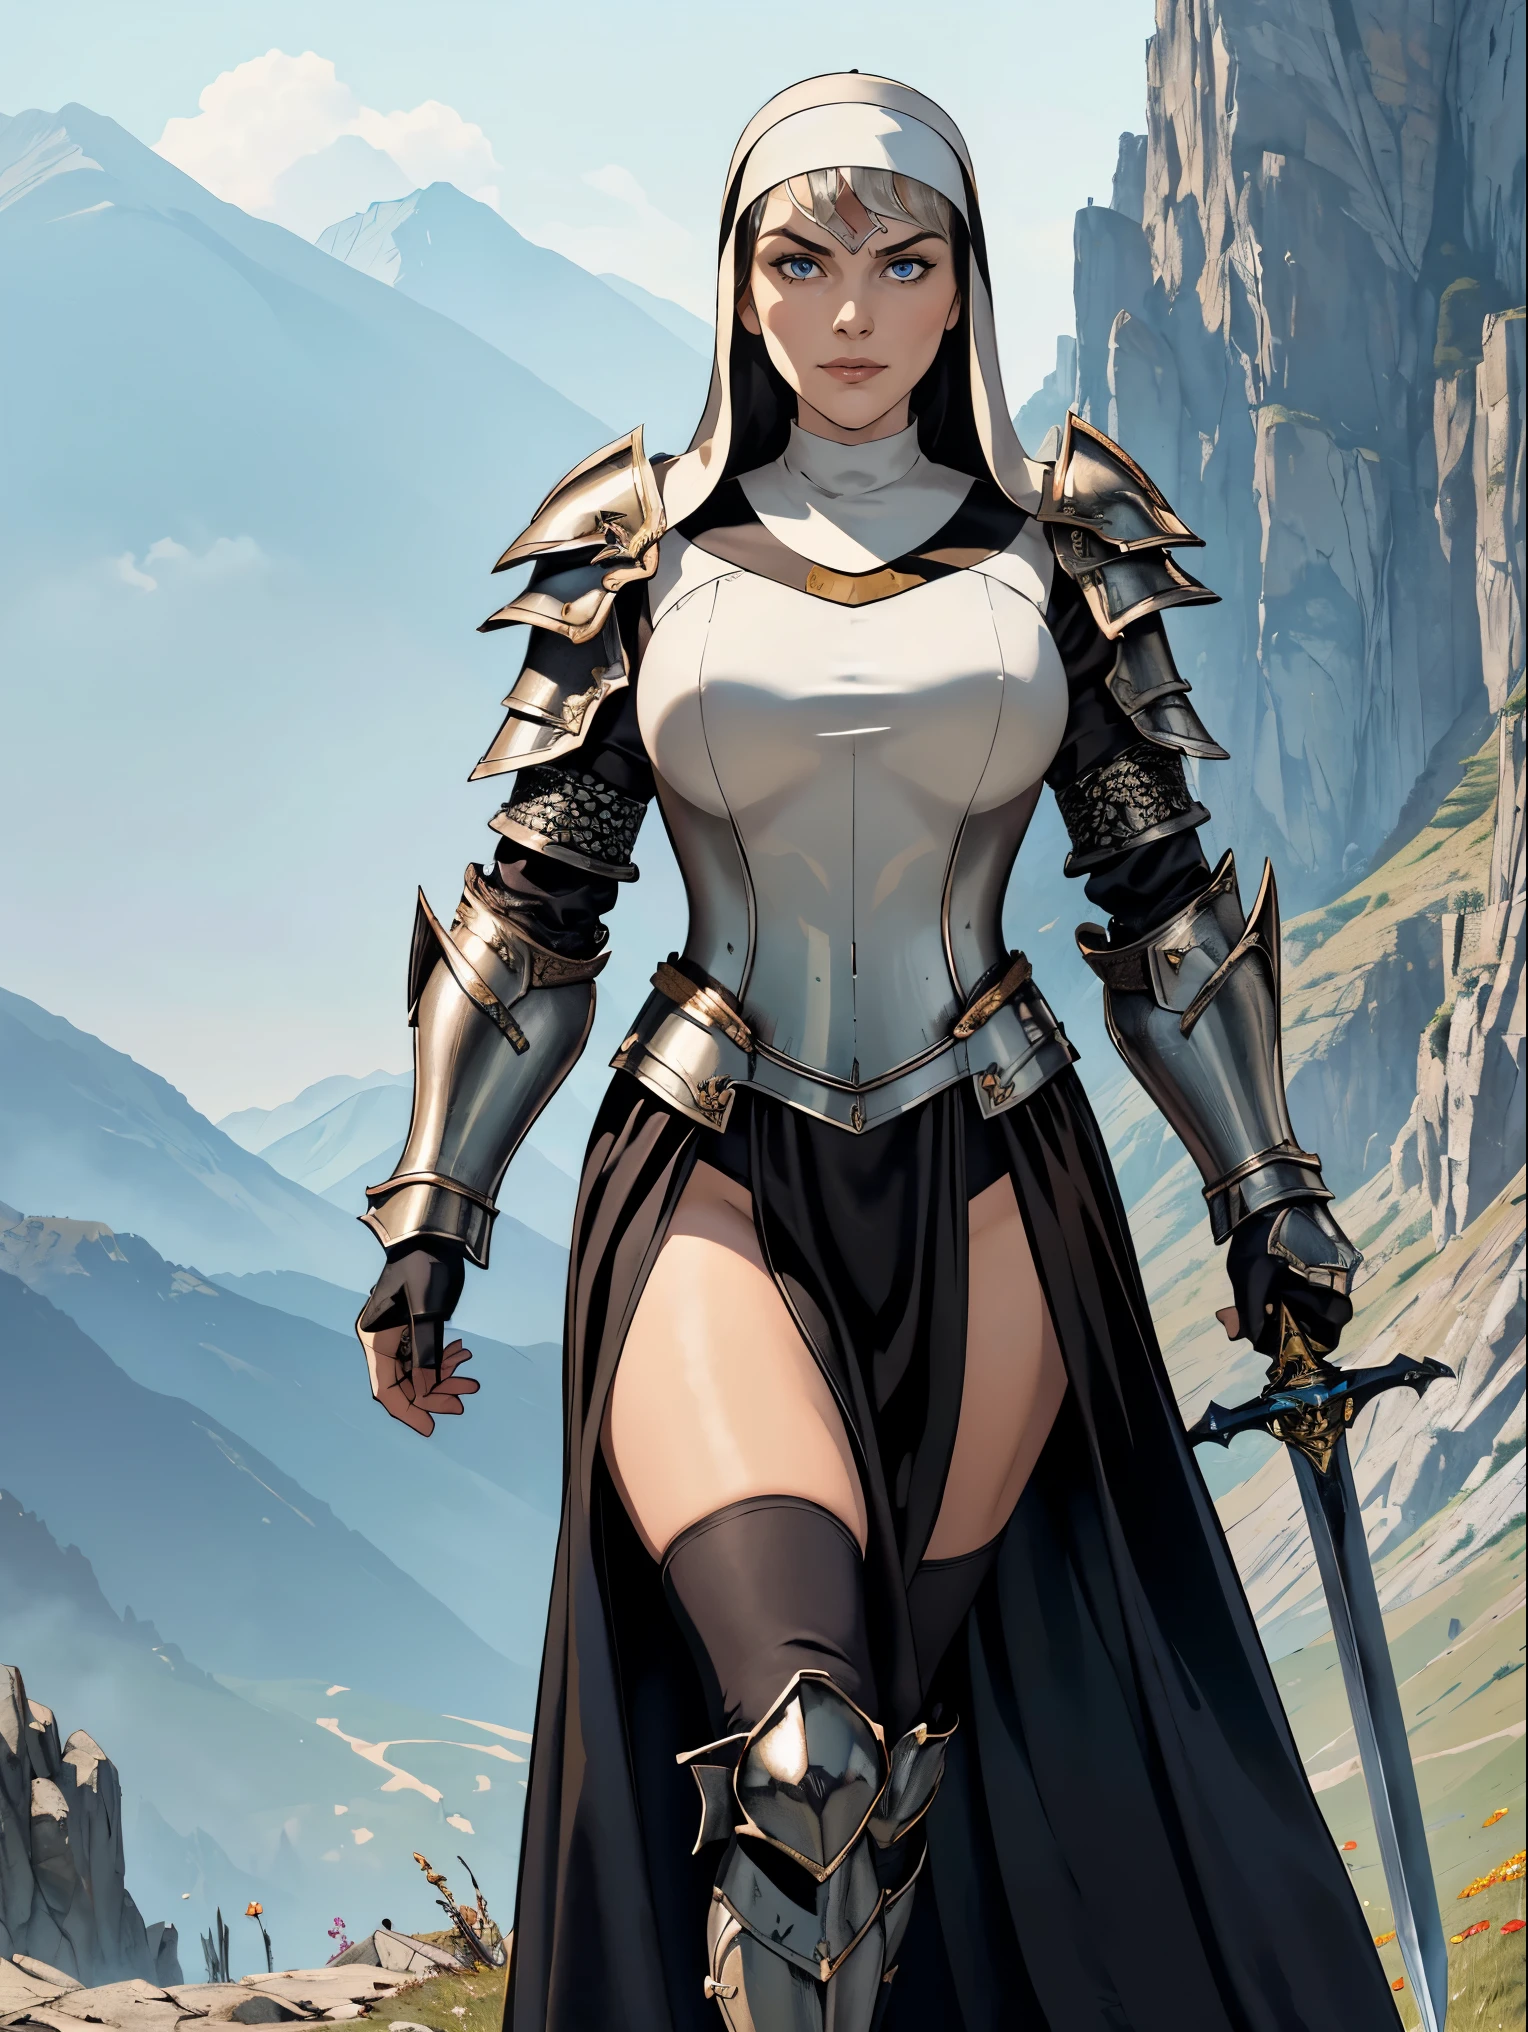 (masterpiece, top quality, best quality, official art, beautiful and aesthetic:1.2), (1girl:1.3), ((Sharp facial features, sharp features, hawkish features)), ((blue eyes)), busty brunette paladin knight girl, extremely detailed, portrait, looking at viewer, solo, (full body:0.6), detailed background, full-body shot, (warm mountain meadow theme:1.1), holy knight, (nun), charlatan, smirk, mysterious, swaying in mountains, armor, polished metal, gold trim, long boots, white fabric, pelvic curtain, robe, pale leather, ((((nun, greatsword, heavy armor, armored, long legs, pelvic curtain, toned, muscular)))), slim waist, slim hips, long legs, medieval (mountain exterior:1.1) background, dark mysterious lighting, shadows, magical atmosphere, dutch angle